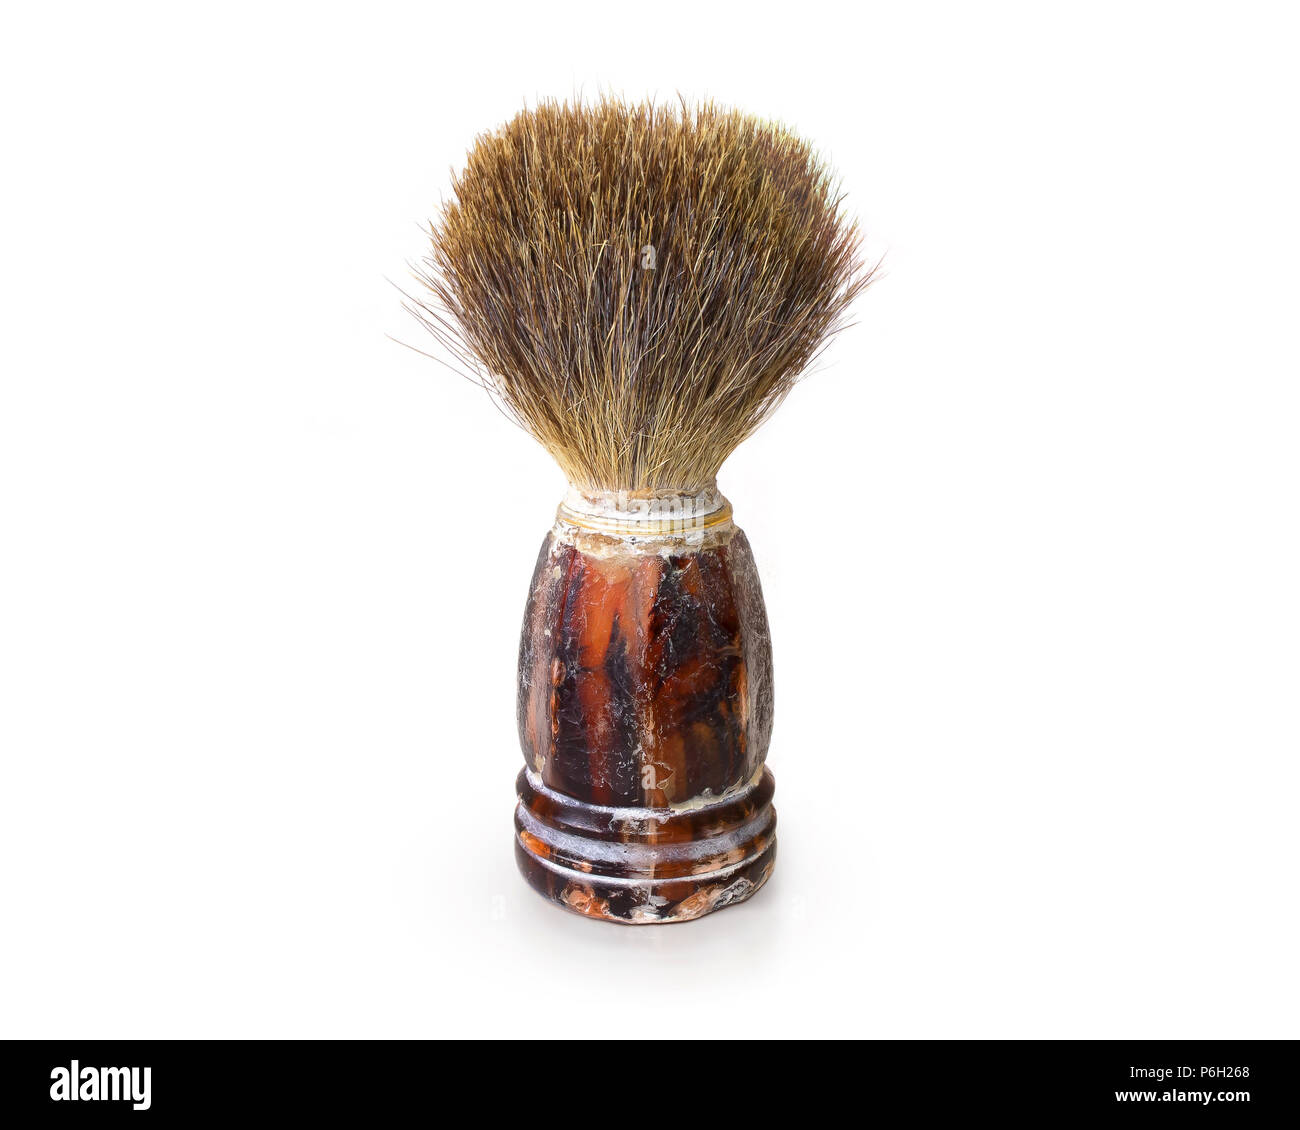 Old shaving brush isolated. Retro mens swab stand on white background. Antique barber tool. Classic shave brush accessories. Curiosity haircutter swob. Stock Photo